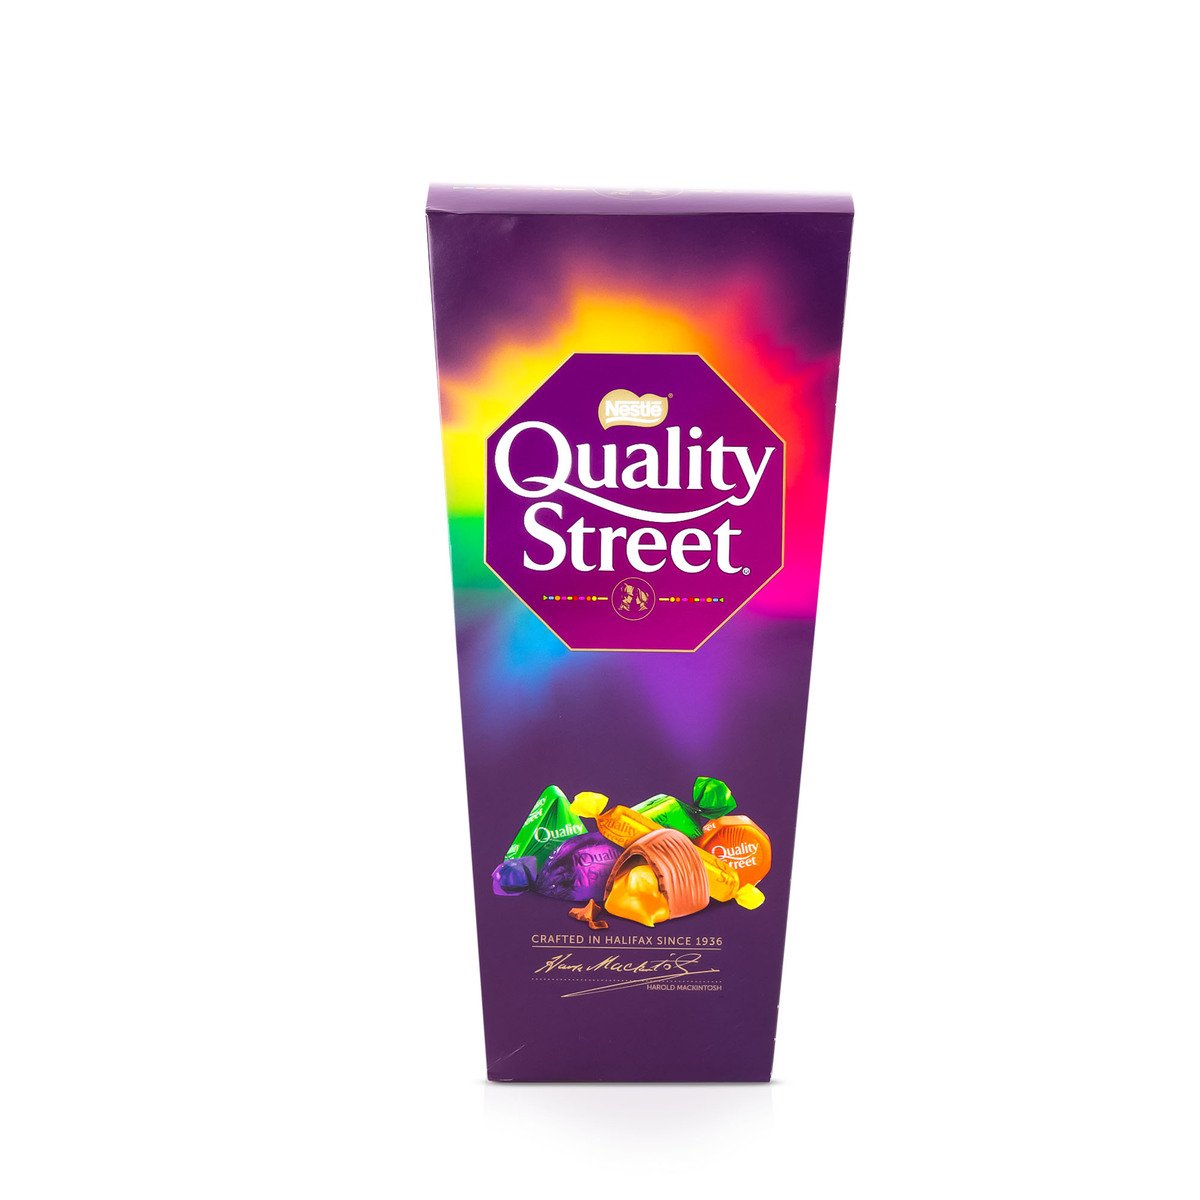 Nestle Quality Street Chocolate 220 G Online At Best Price Boxed Chocolate Lulu Bahrain 0950